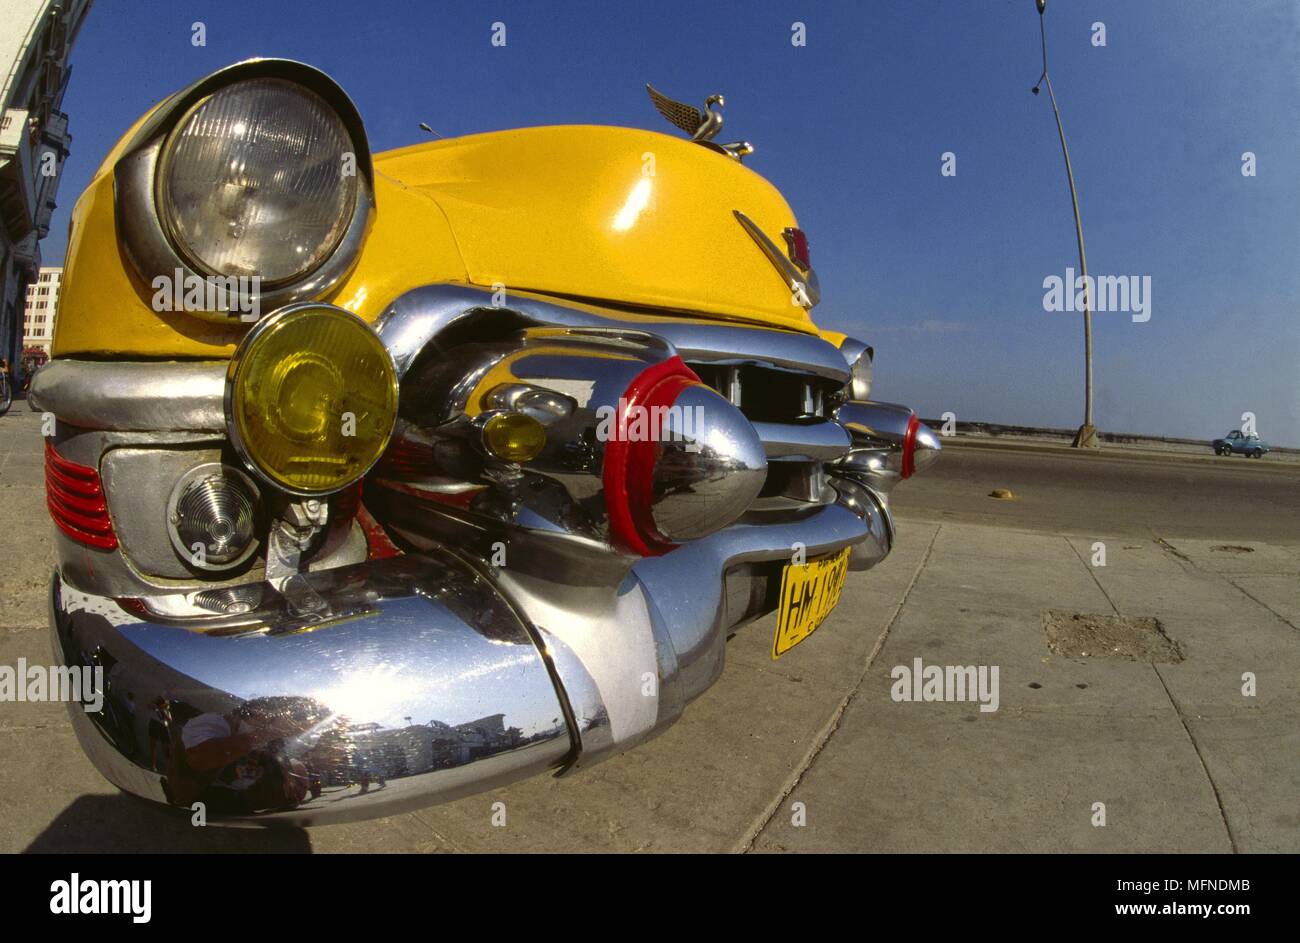 A 1952 Cadillac in the streets of La Havana.   Date:   Ref: B350 093521 0006  COMPULSORY CREDIT: Luis Quintanal Cabriale / Photoshot Stock Photo